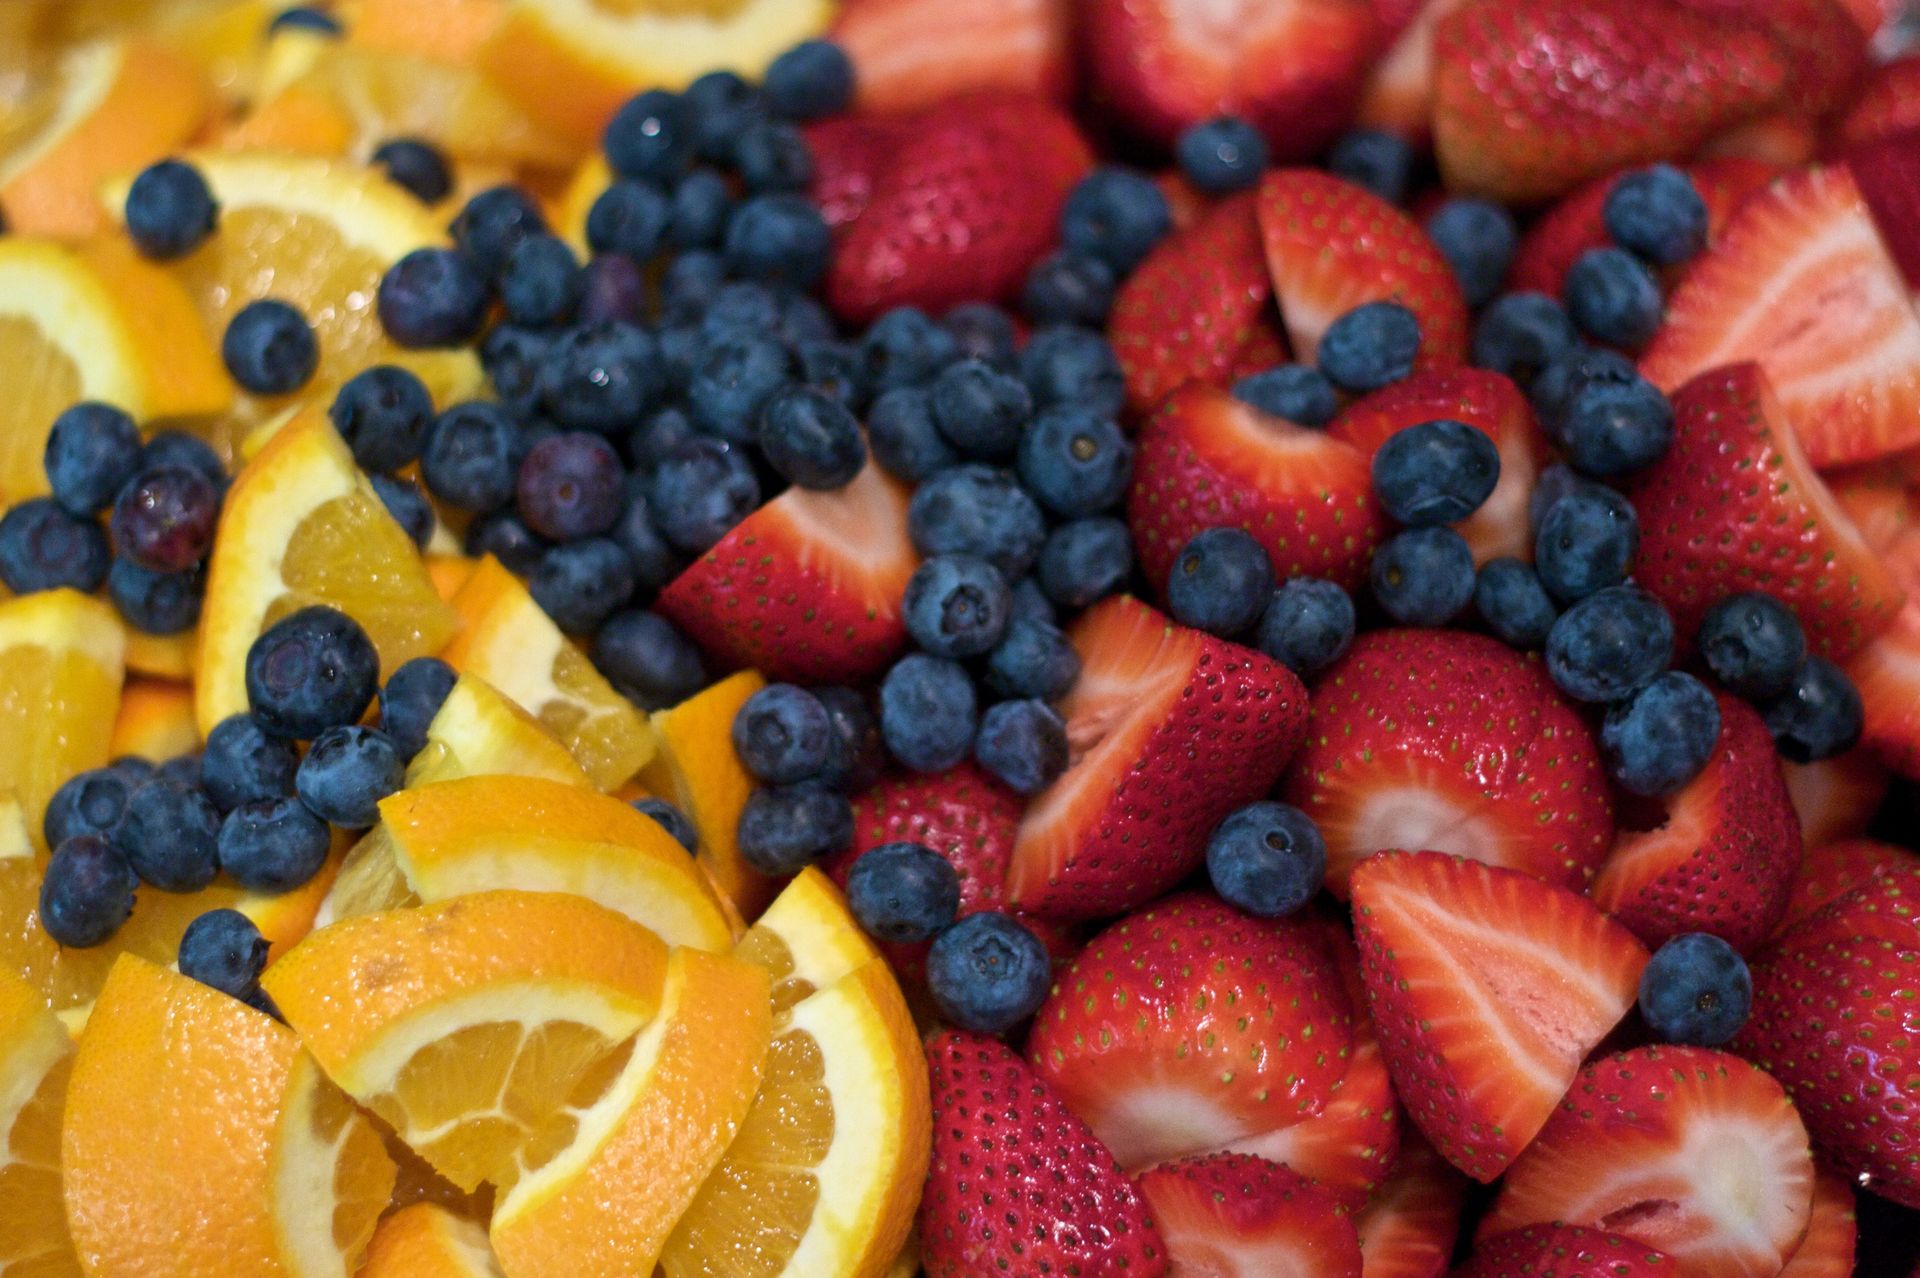 A combination of orange slices, blueberries, and strawberries.